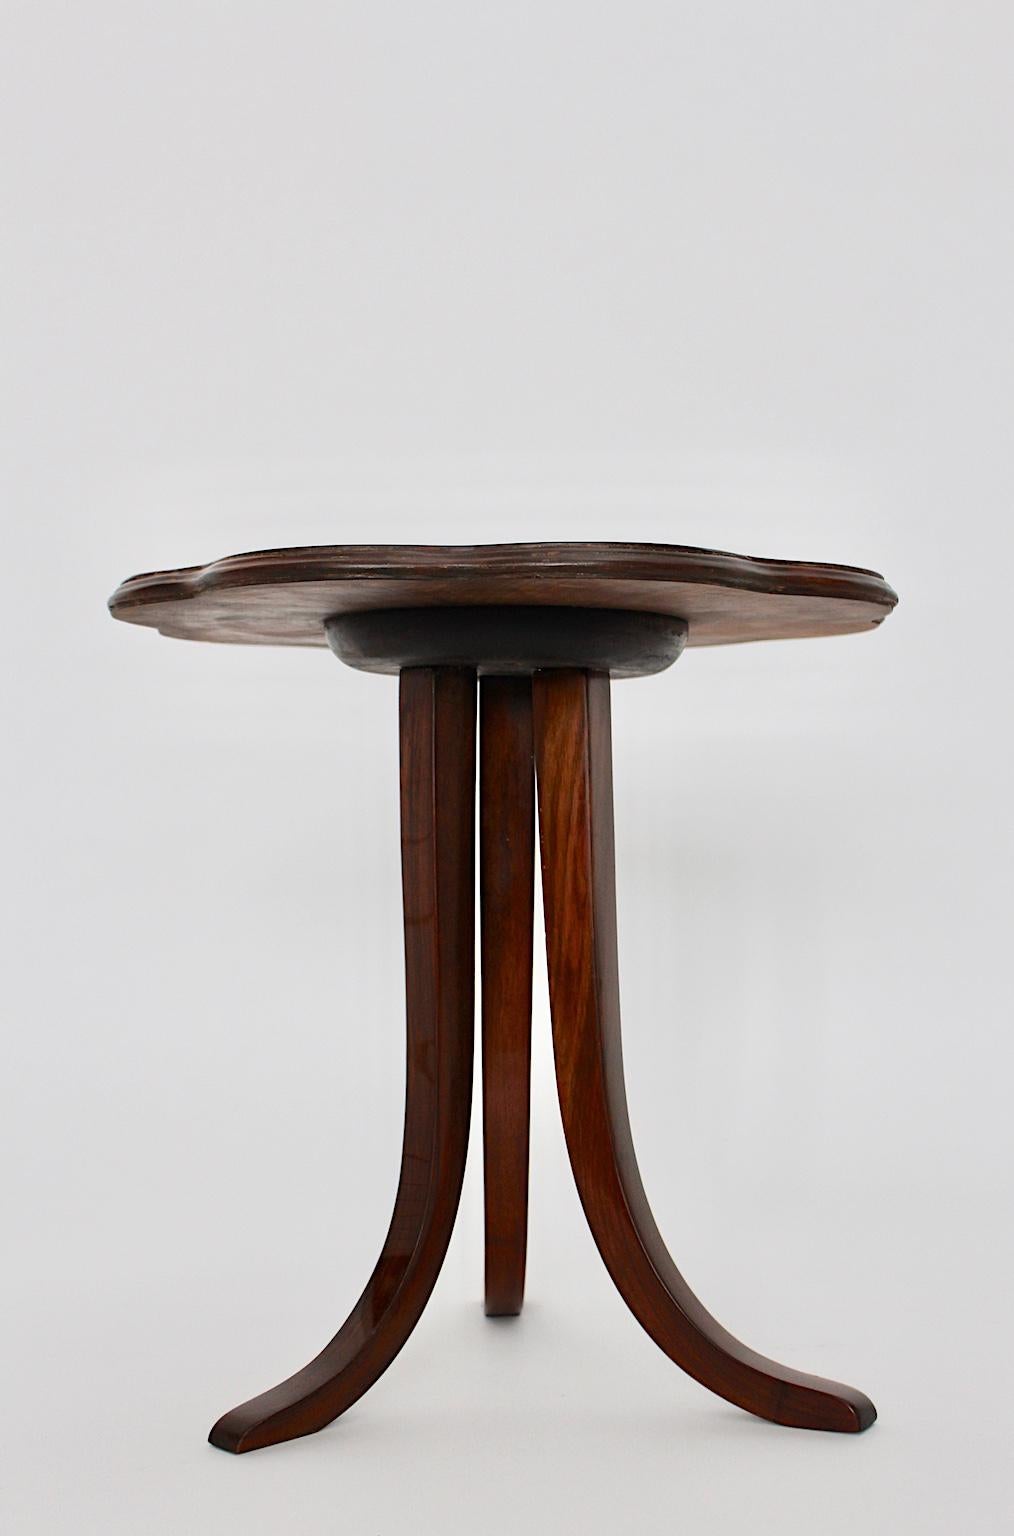 Walnut Art Deco side table or coffee table, which was designed by Josef Frank, Vienna circa 1925 and sources from the heart of Europe, Austria, Vienna.

Josef Frank (1885-1967) Austrian architect and designer
He created buildings and many iconic